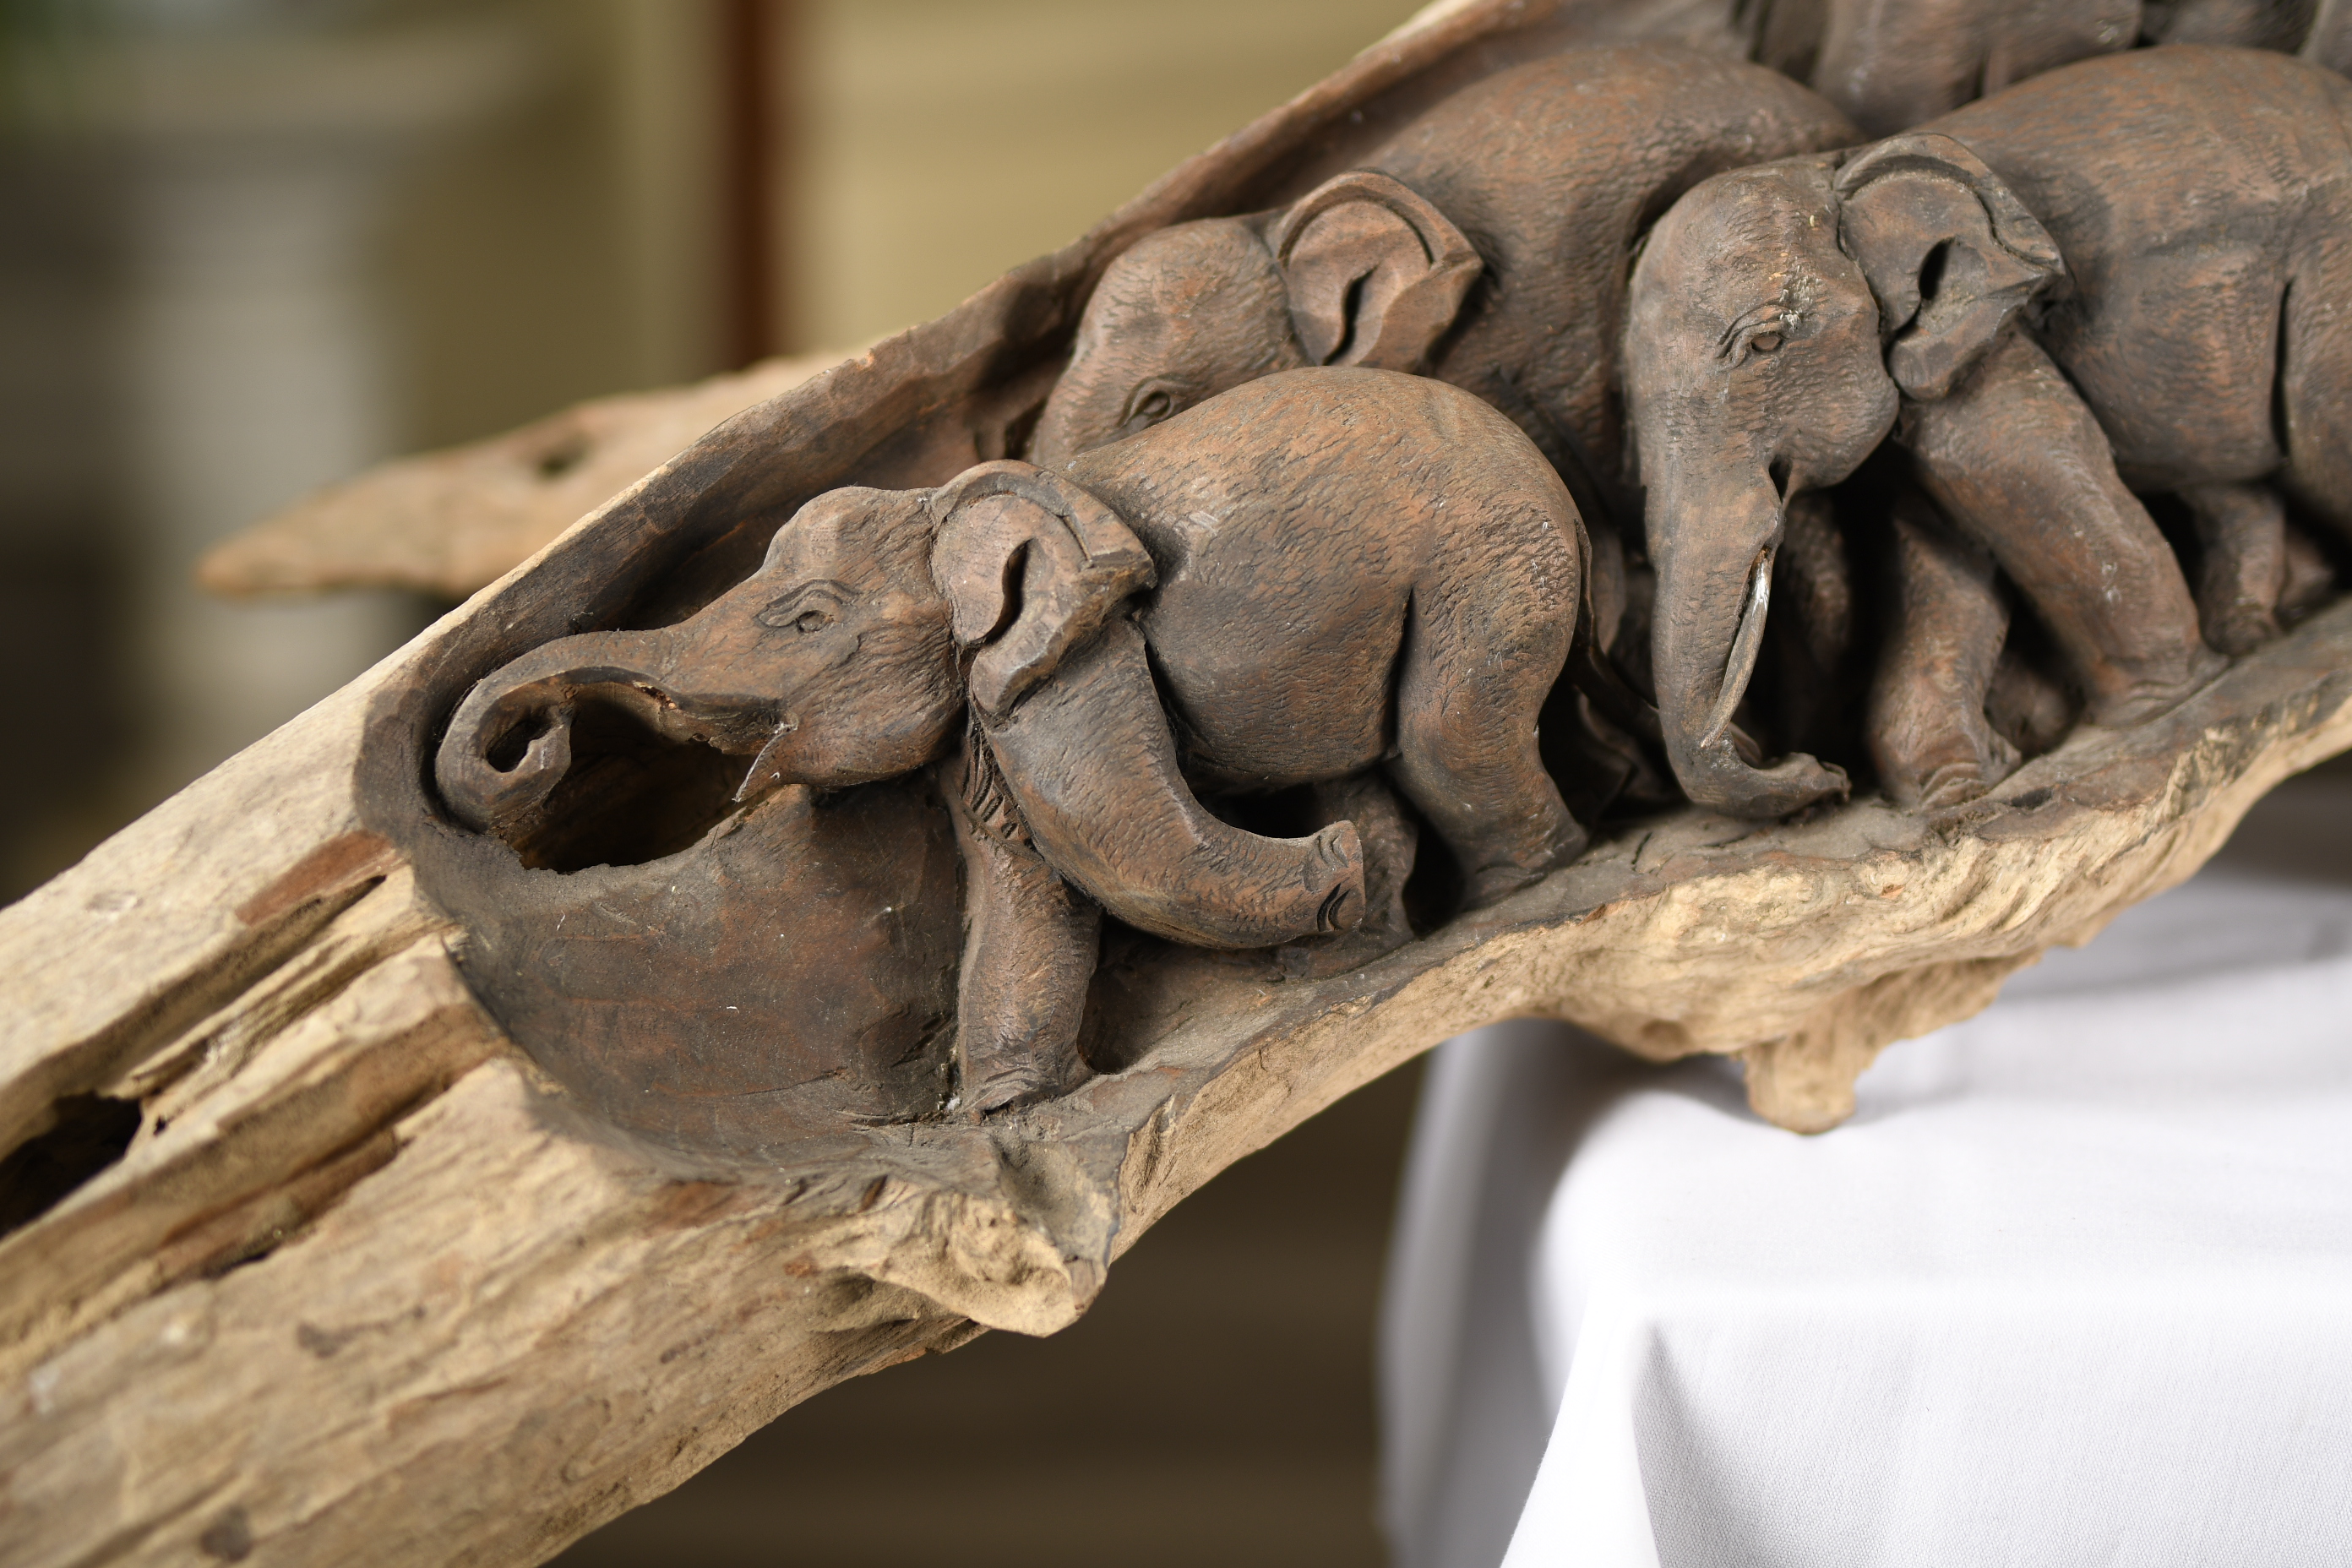 Amazing 4ft Hand carved Wooden Elephant Sculpture. Carved from One Piece of Wood. - Image 5 of 9